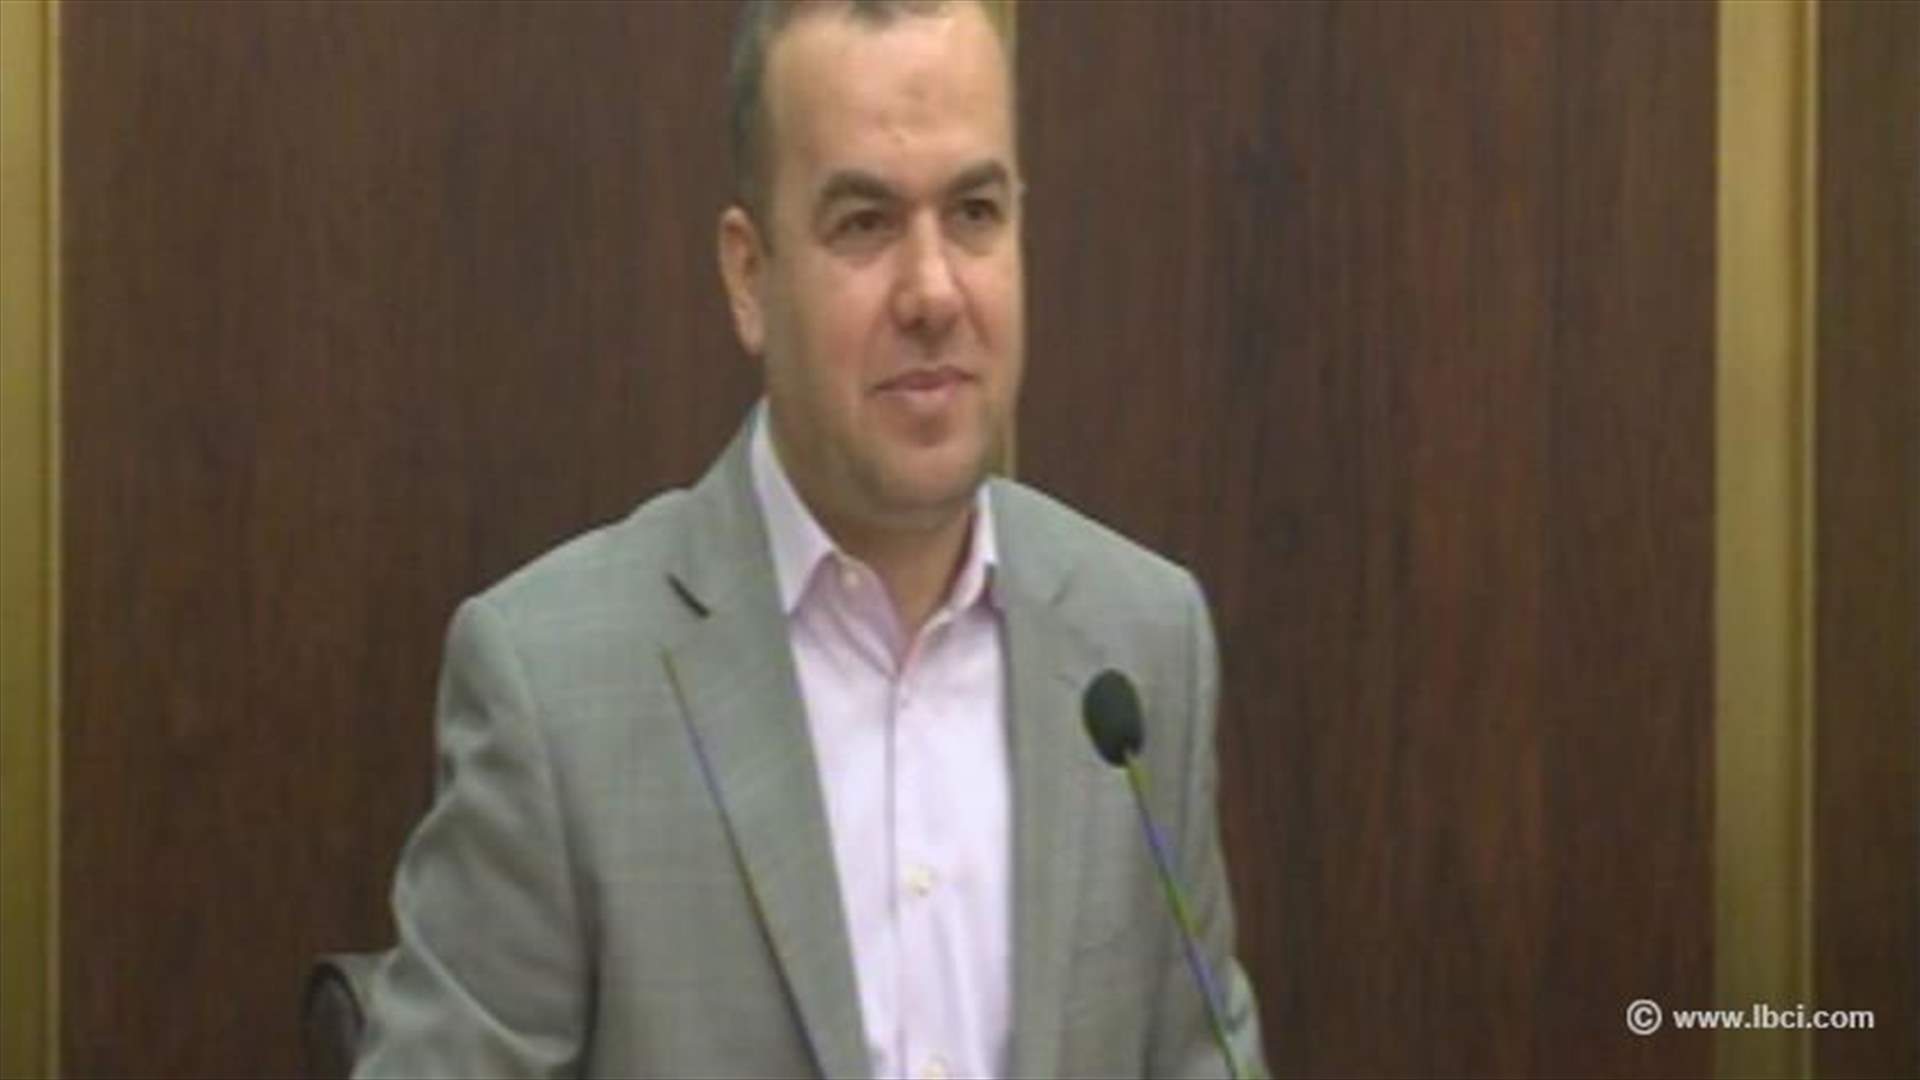 MP Fadllallah expresses objection to courts’ rule on Al Akhbar newspaper case